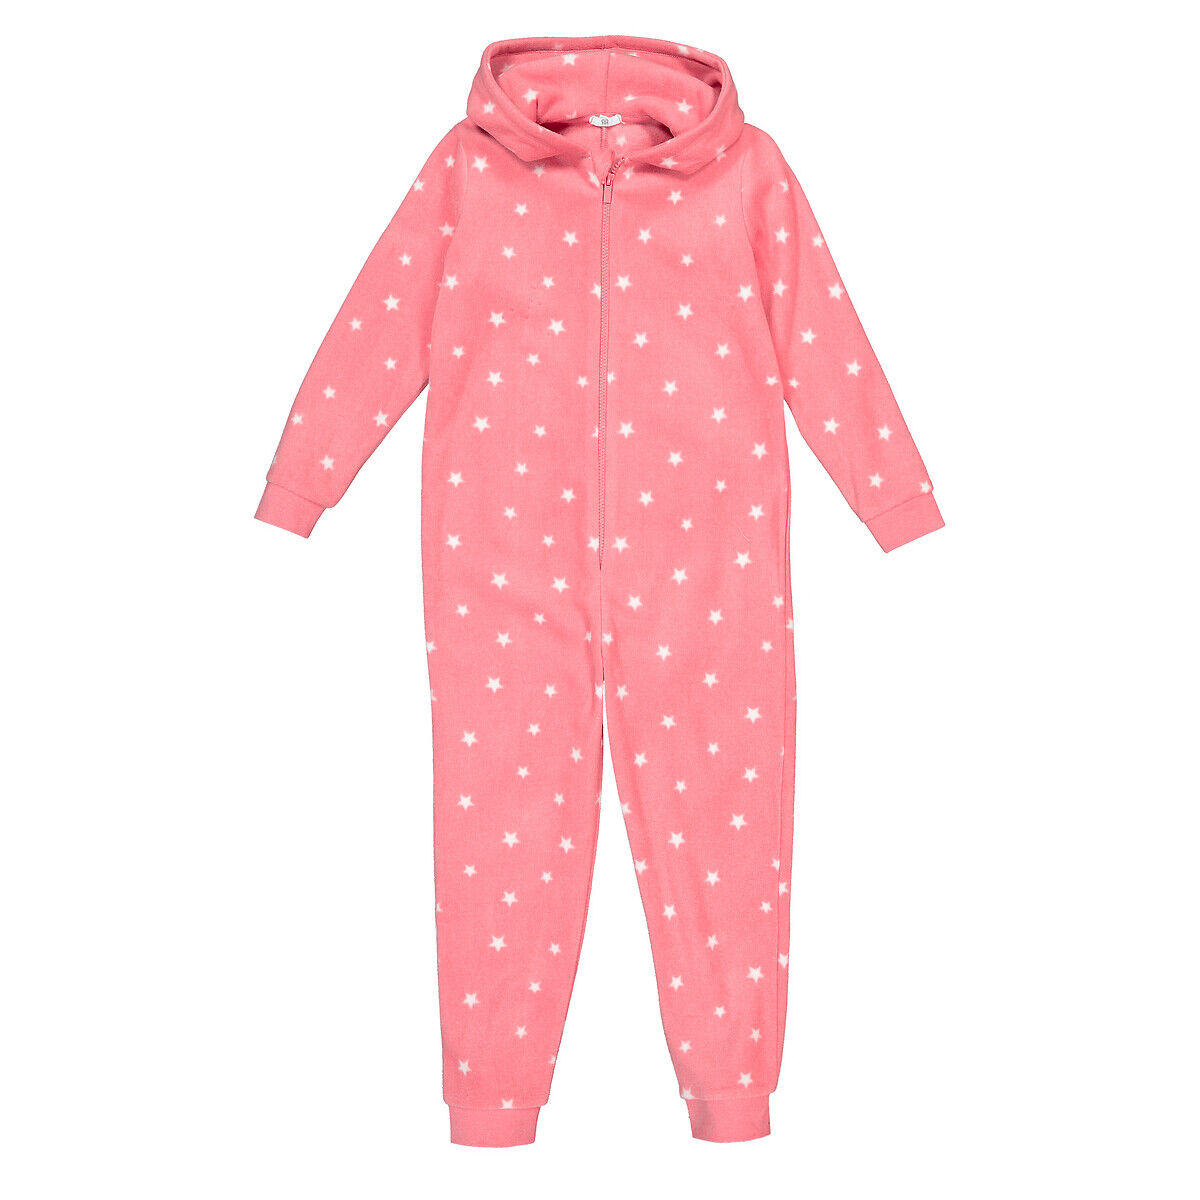 LA REDOUTE COLLECTIONS Bedruckter Overall mit Kapuze und Sternenmuster, 3-18 Jahre ROSA